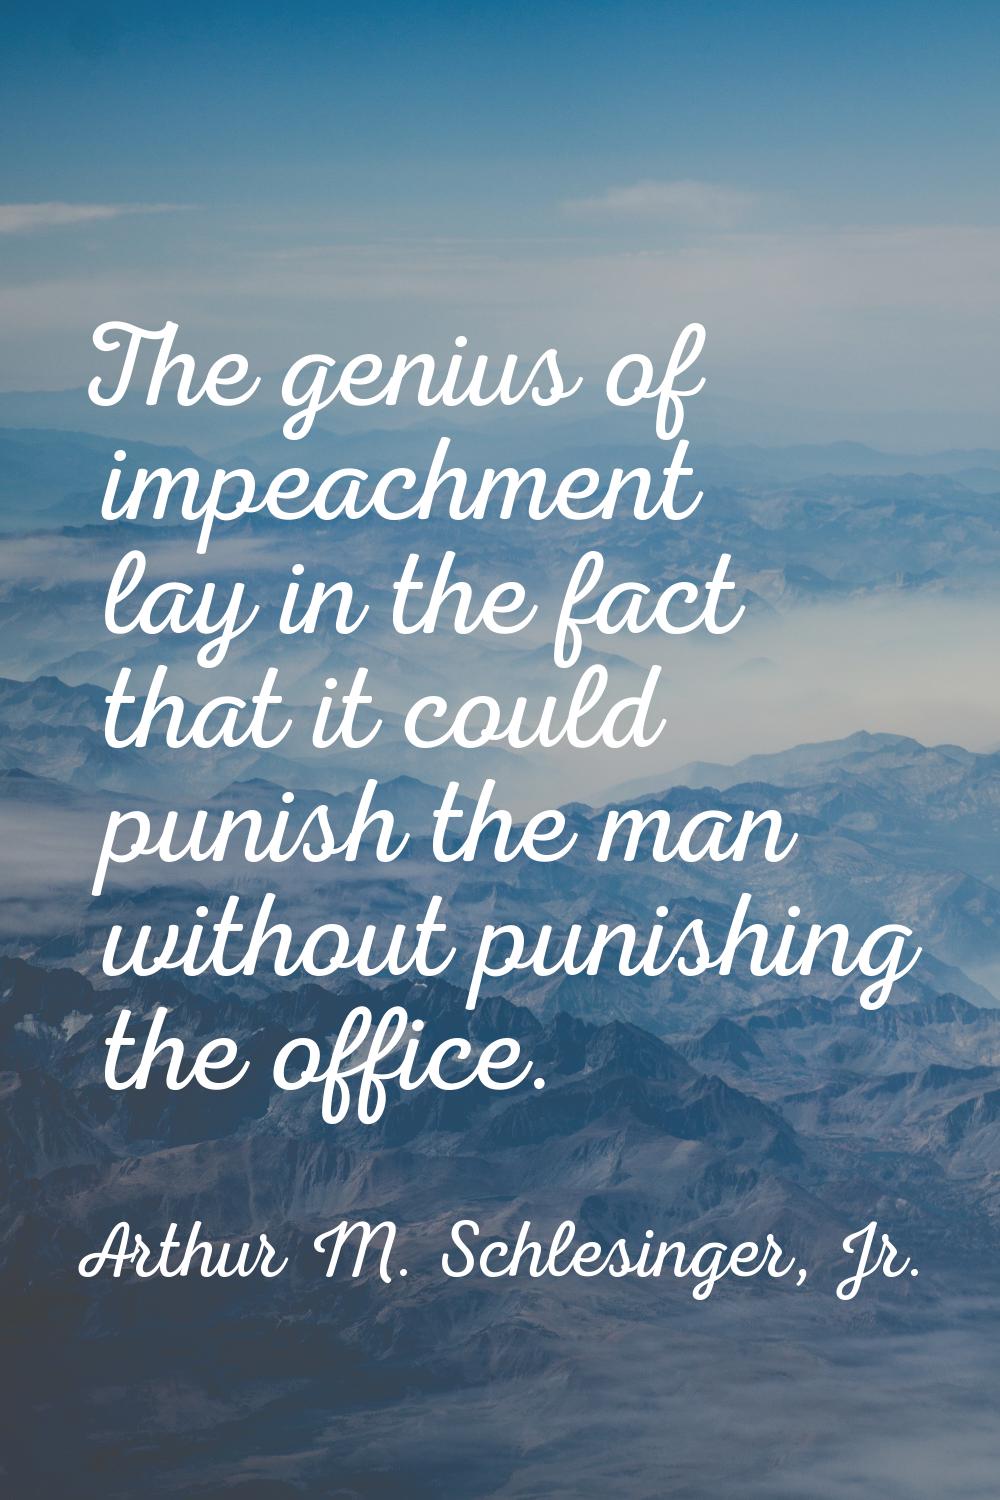 The genius of impeachment lay in the fact that it could punish the man without punishing the office